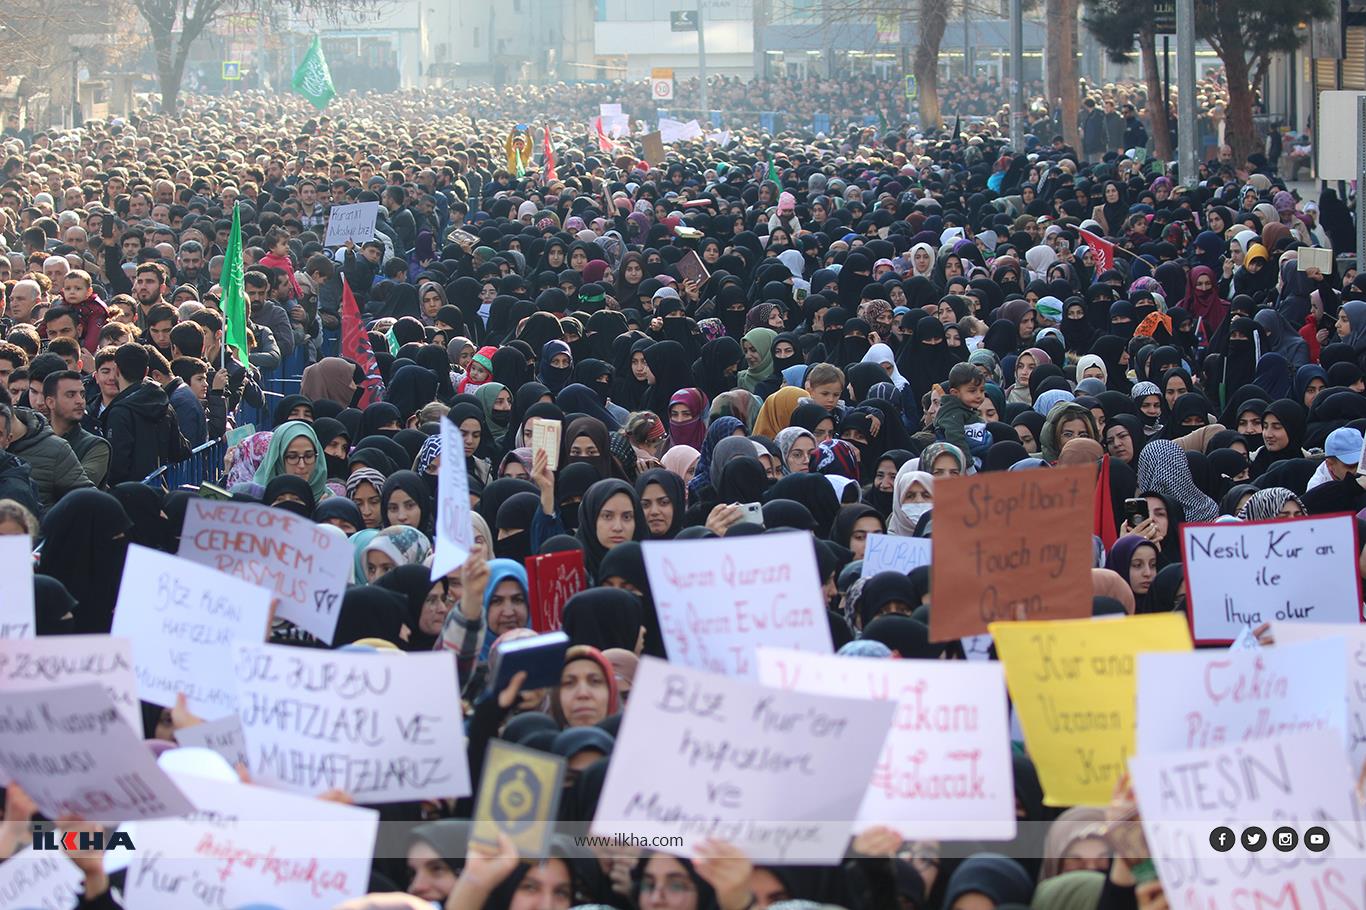 Thousands gather in Batman to protest the burning of the Holy Quran in Sweden